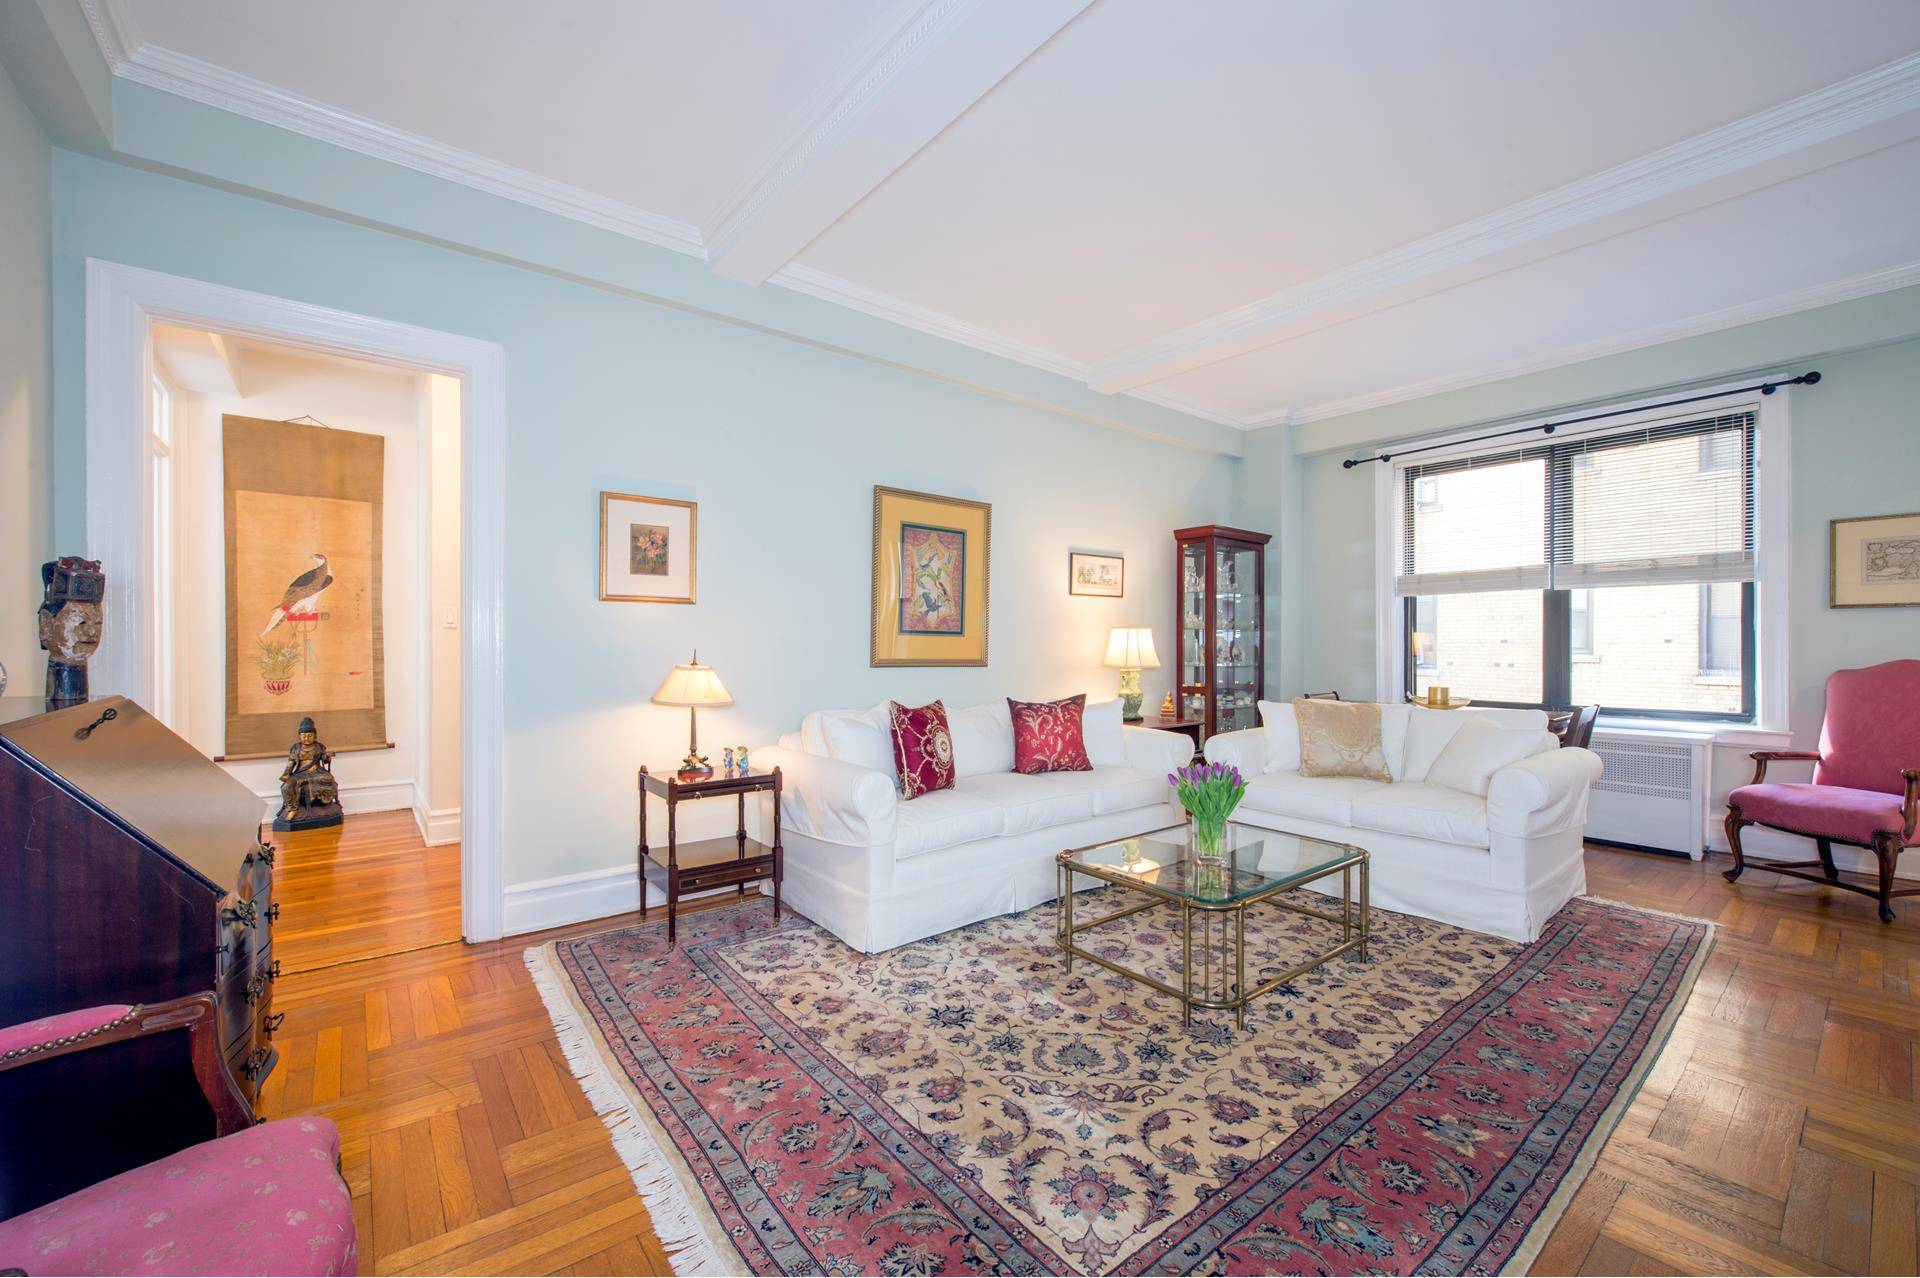 GRACIOUS PREWAR BEAUTY ! Move right into this lovely and serene 2 Bedroom, 1.